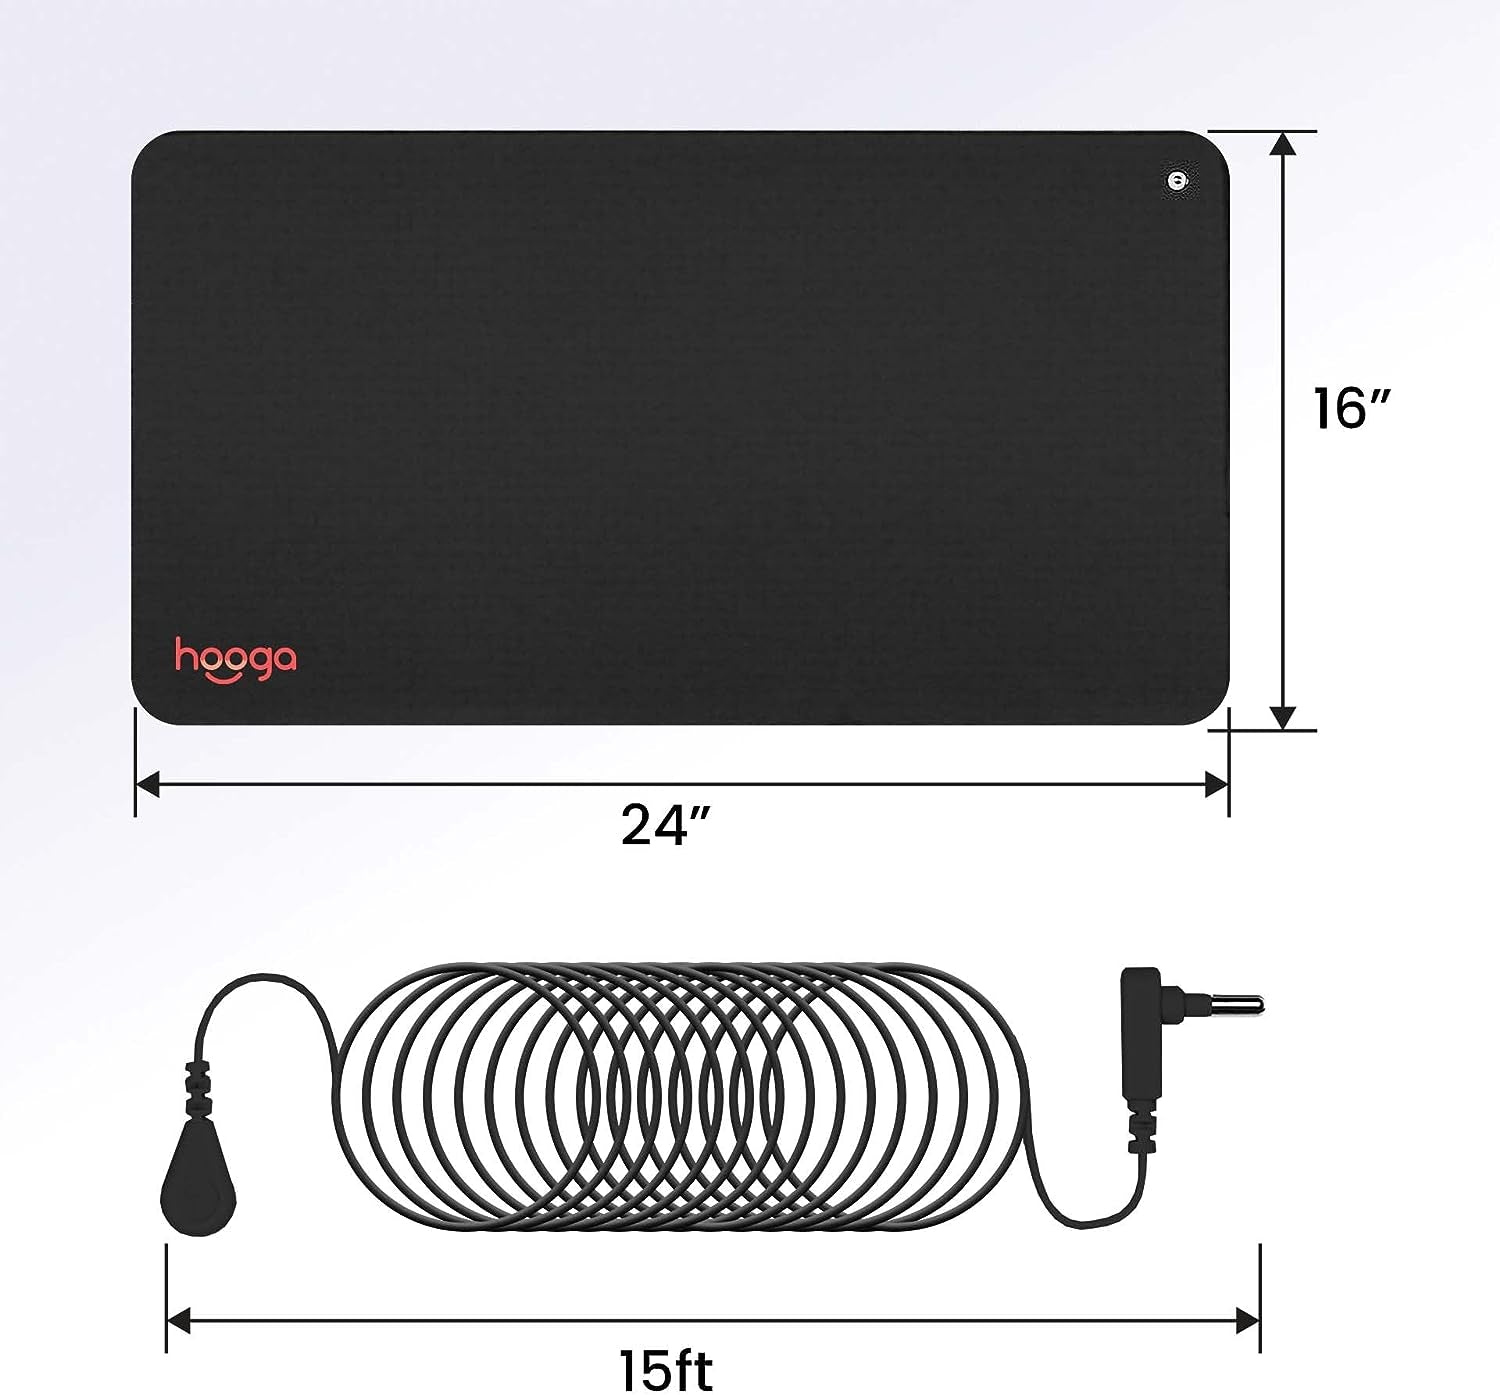 Grounding Mat for Sleep, Energy, Pain Relief, Inflammation, Balance, Wellness. Earth Connected Therapy. Indoor Grounding at Home, Office, Work. 15 Foot Cord Included. Conductive Carbon